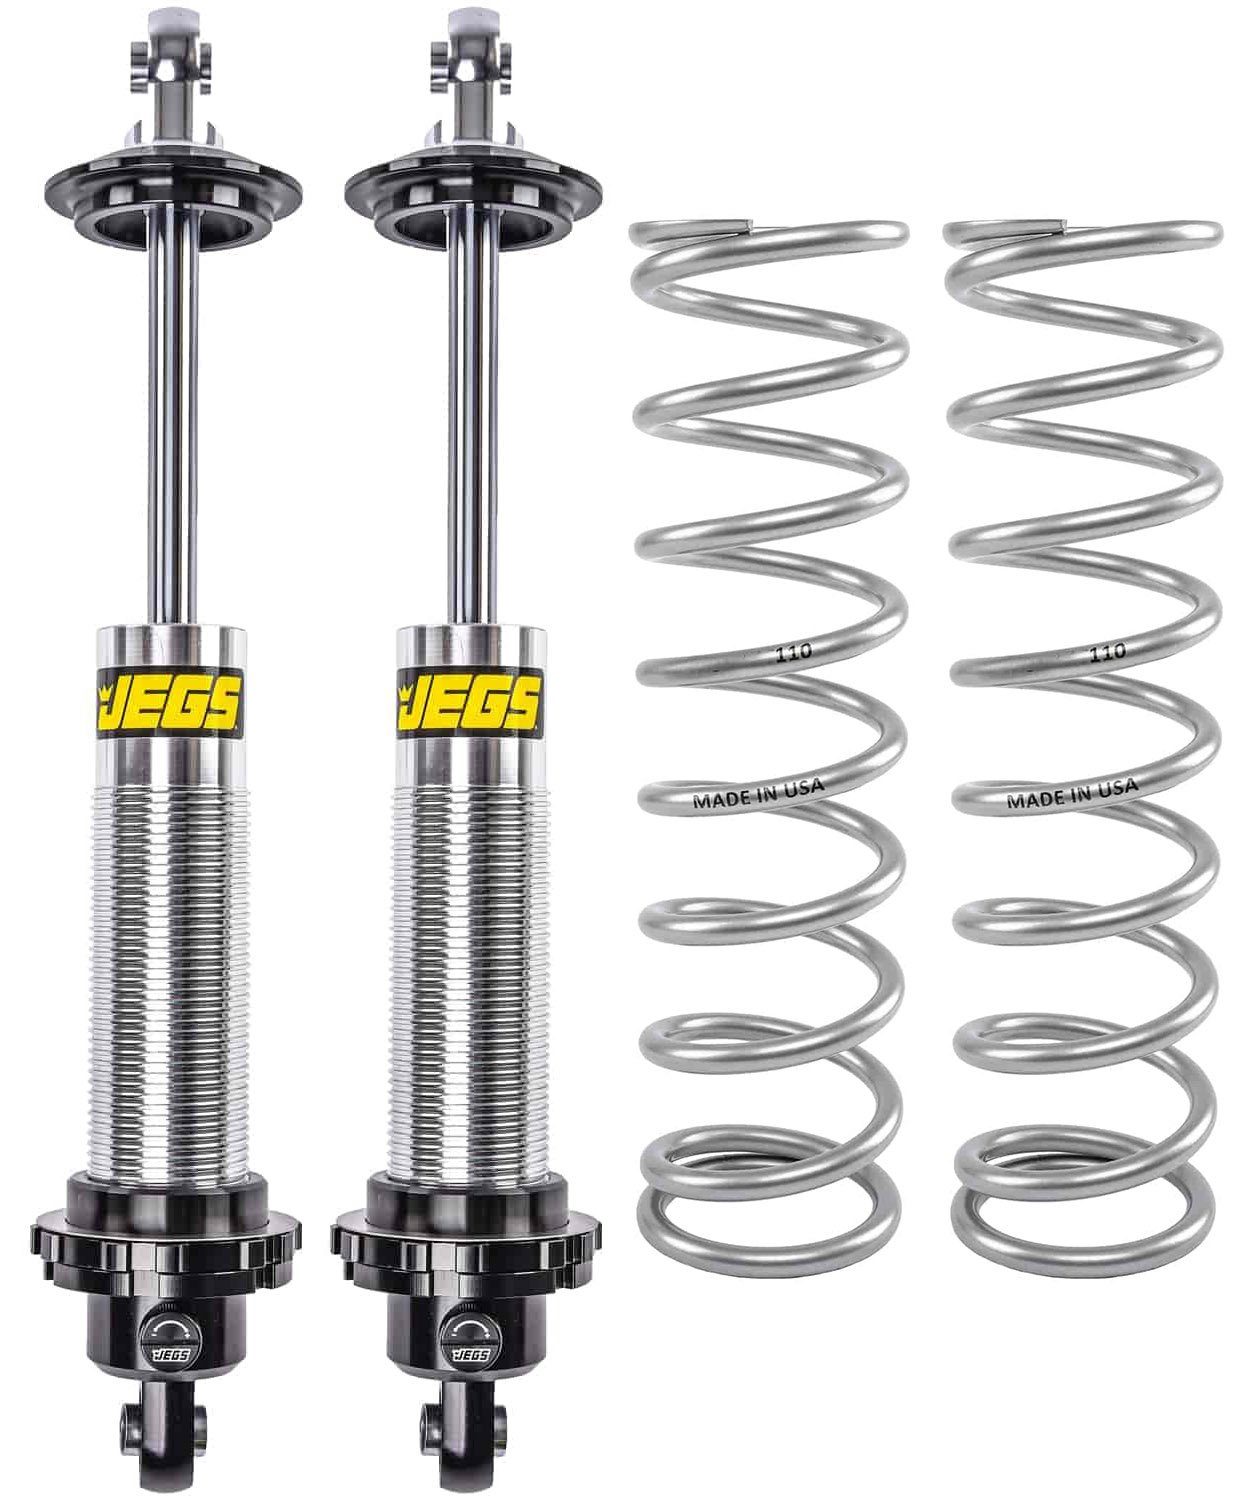 Single Adjustable Coil-Over Shocks and Coil-Over Springs Kit [12 in., 110 lbs./in. Springs]